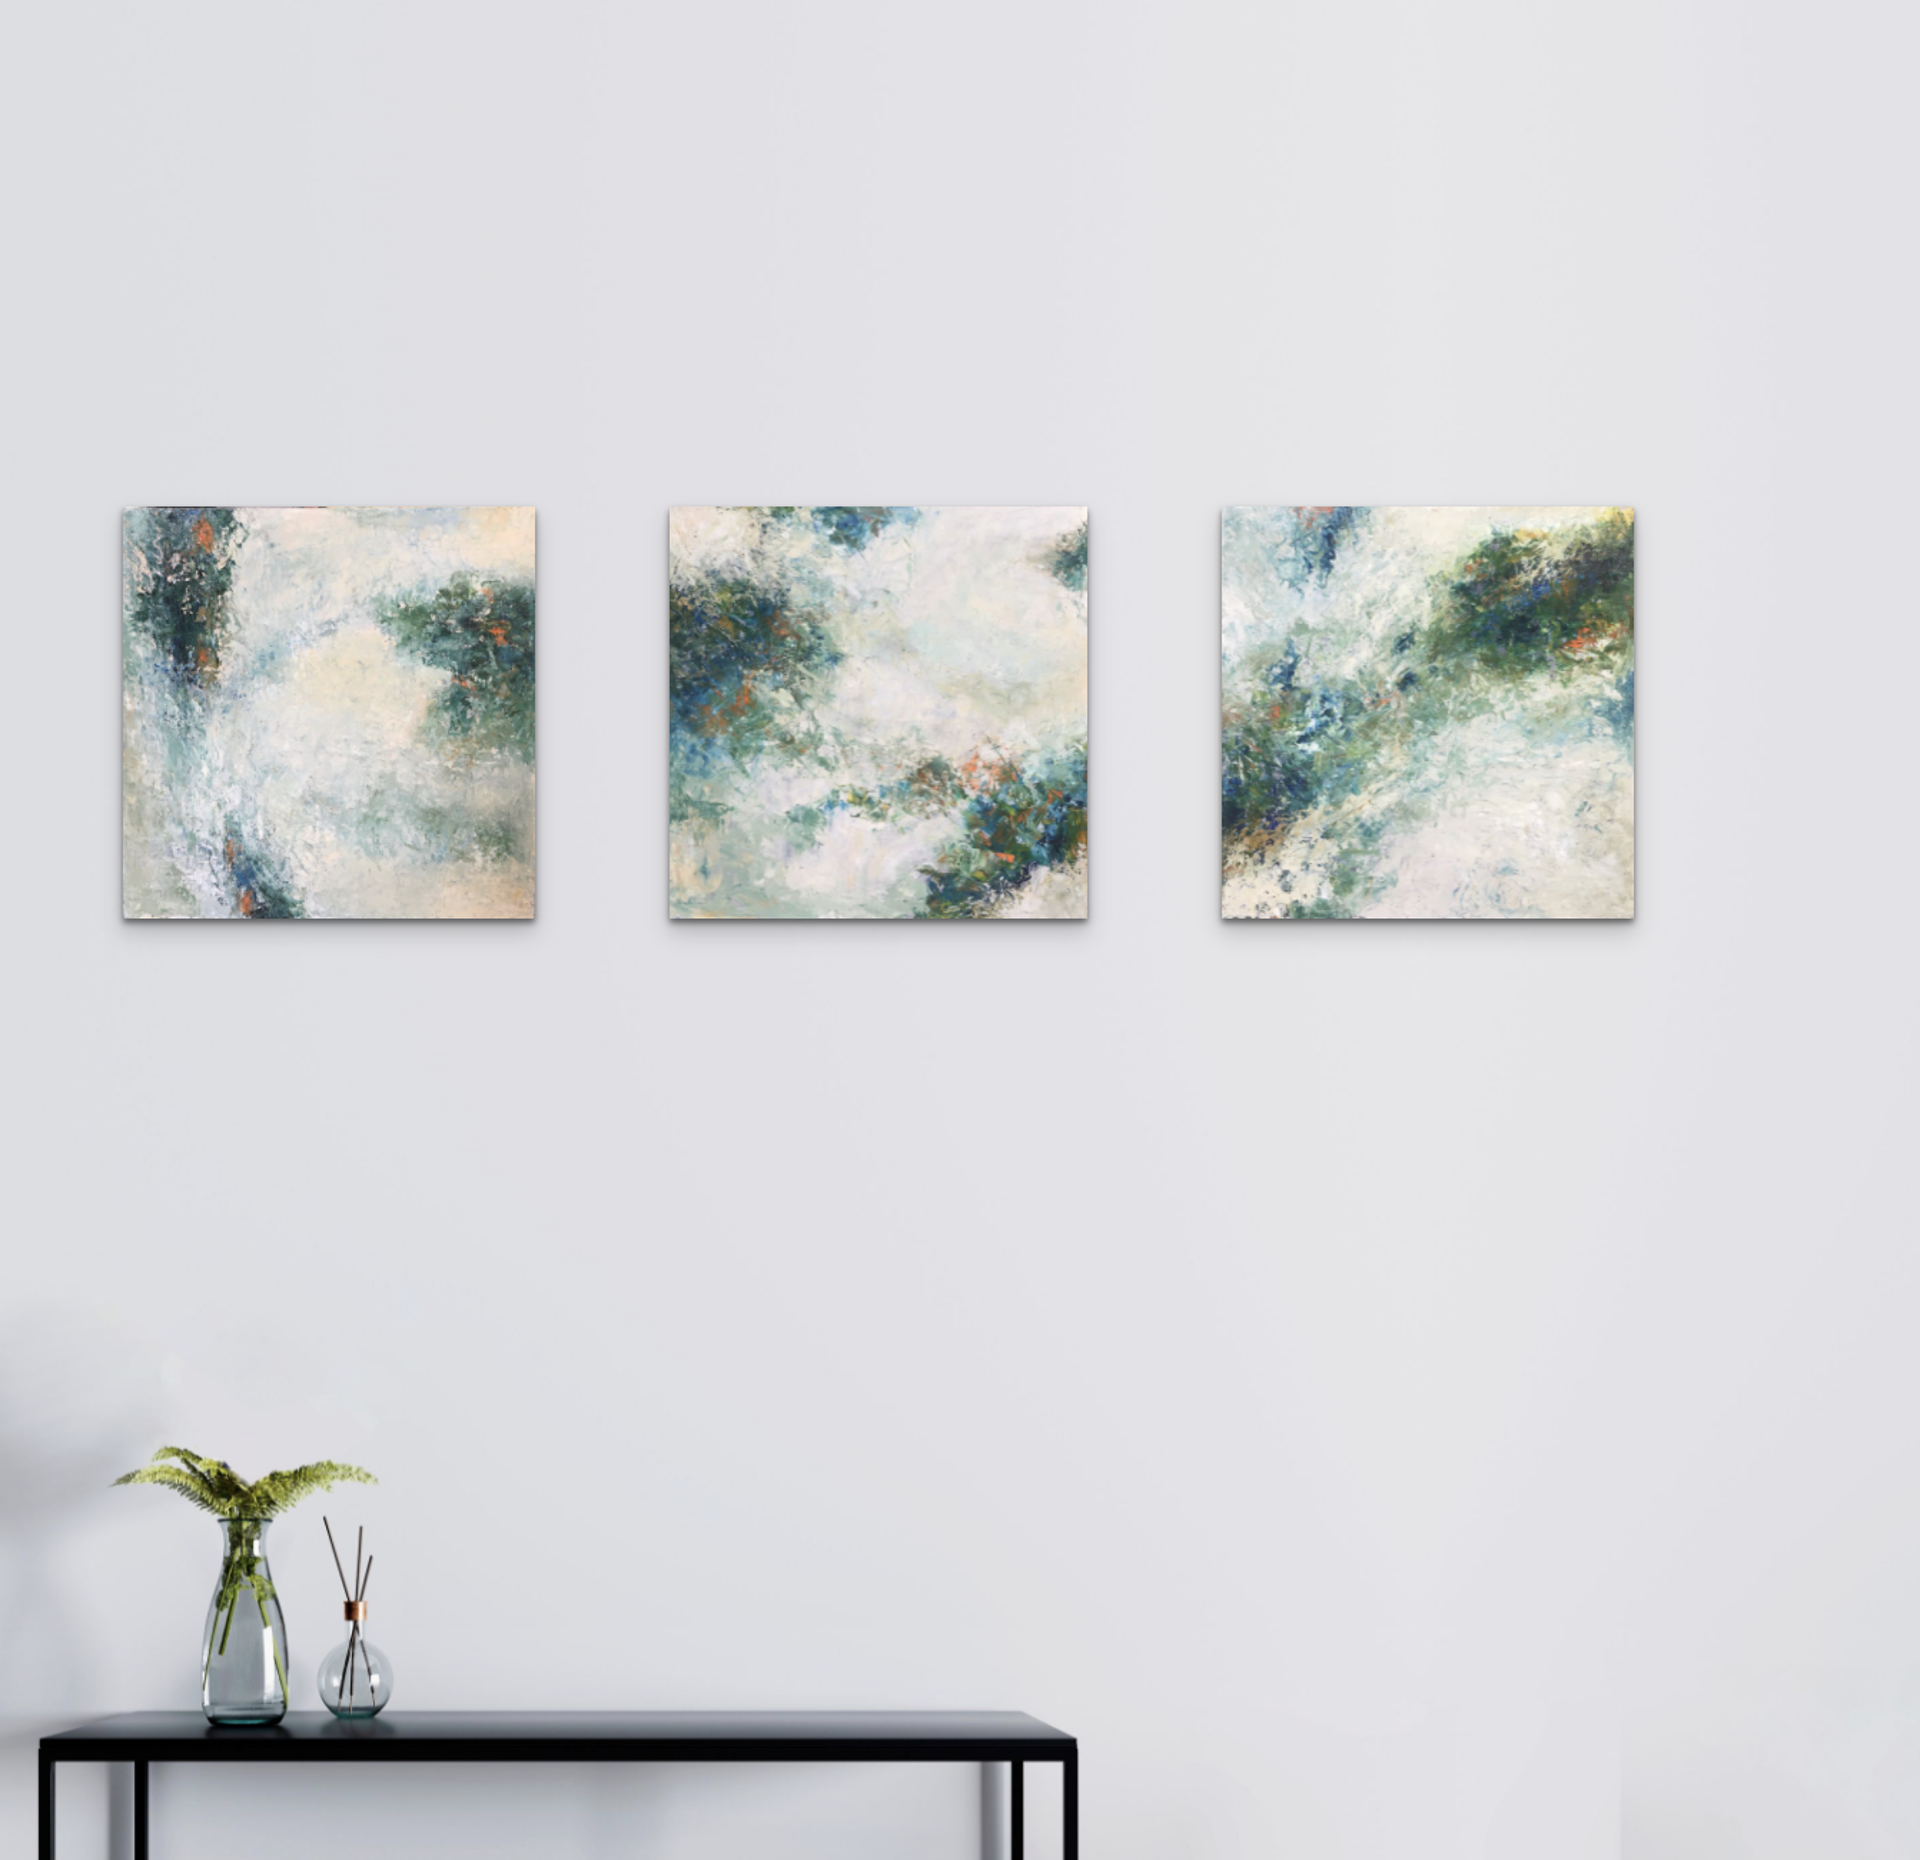 Reaching for You, triptych by Donna McGinnis